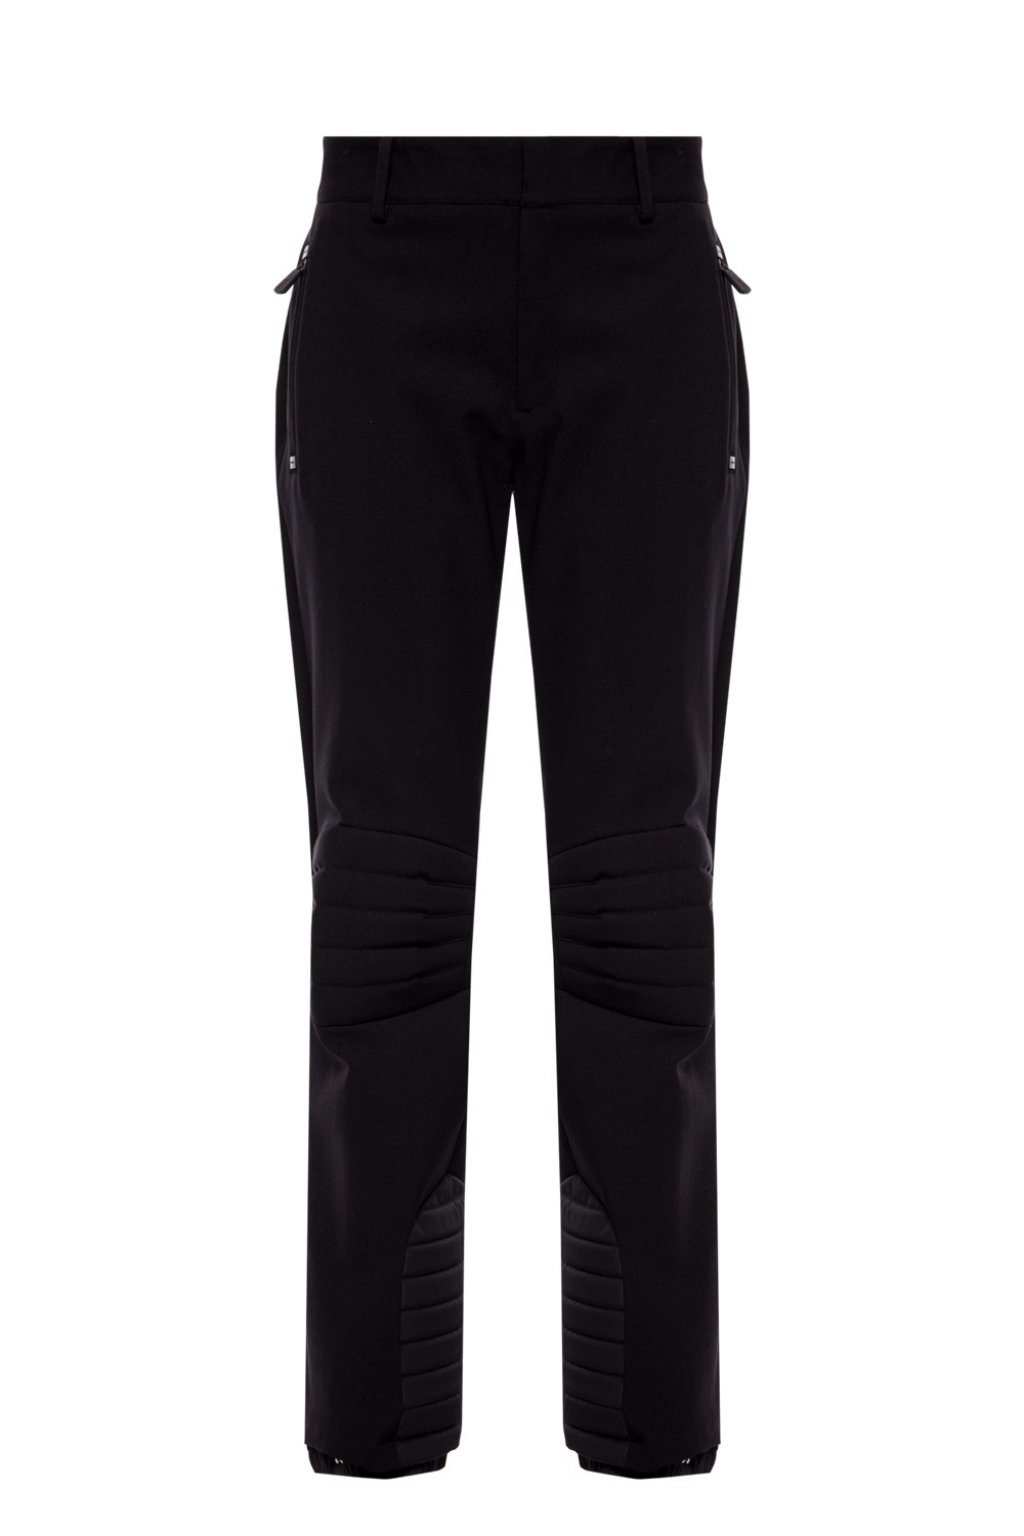 Moncler Grenoble Ski trousers trim with sewn-in zippers